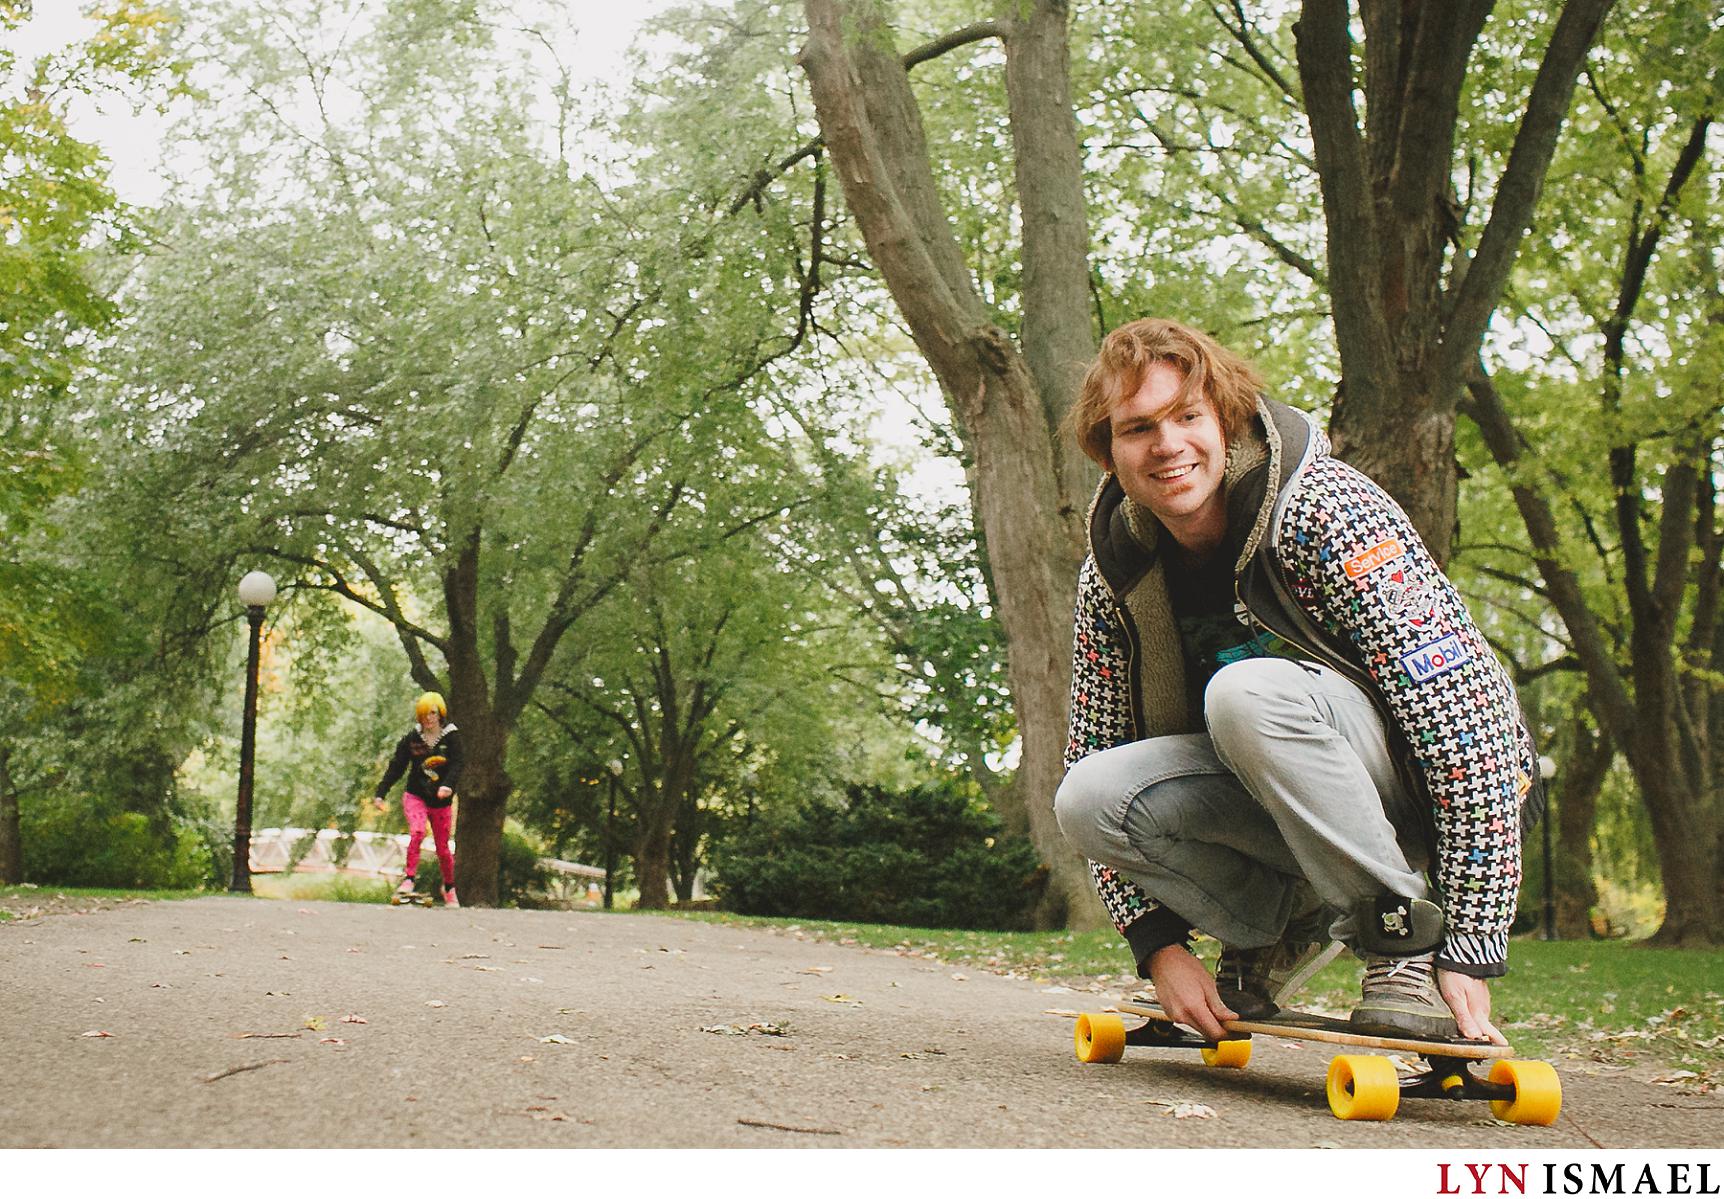 A young man shows off his longboarding skills at Victoria Park in Kitchener.